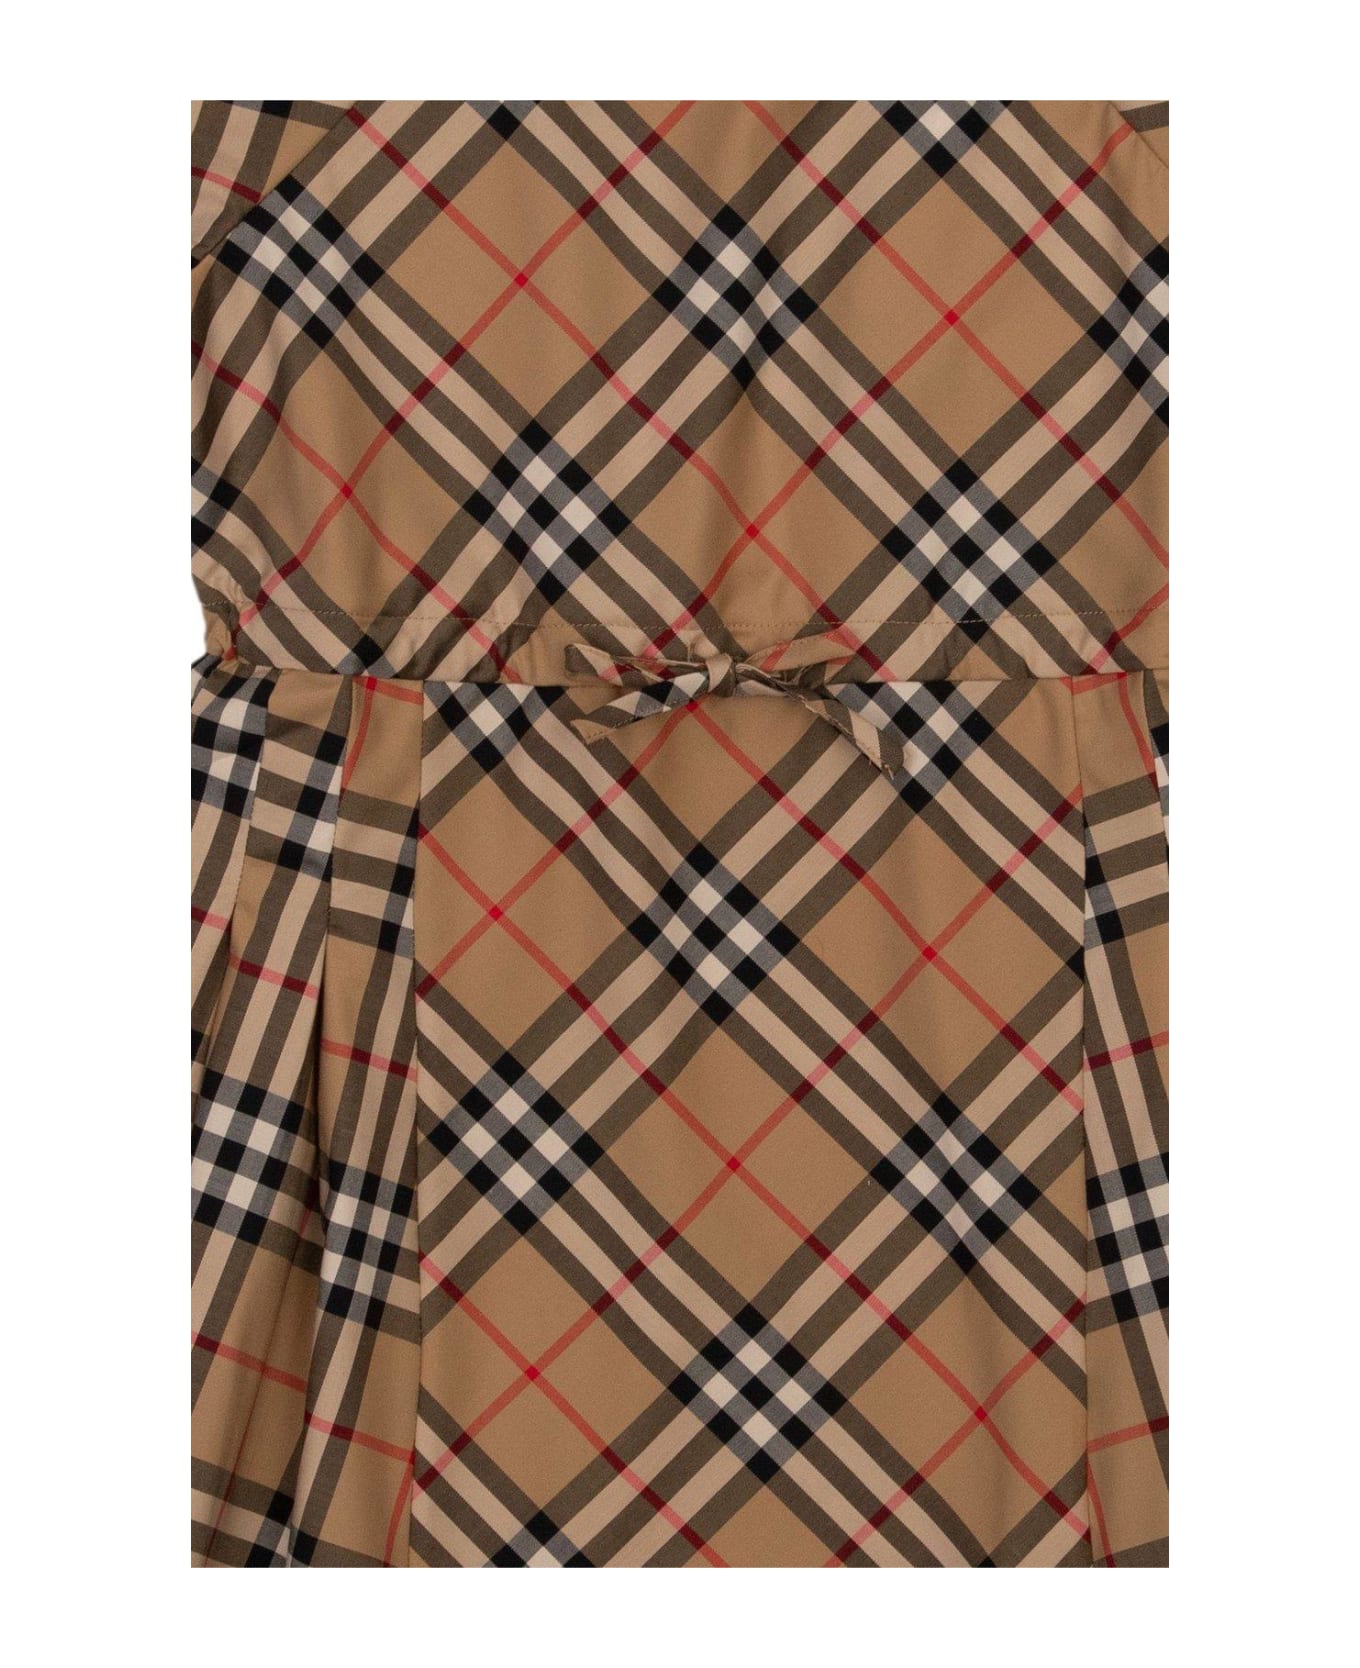 Burberry Checked Short-sleeved Dress - Archive beige